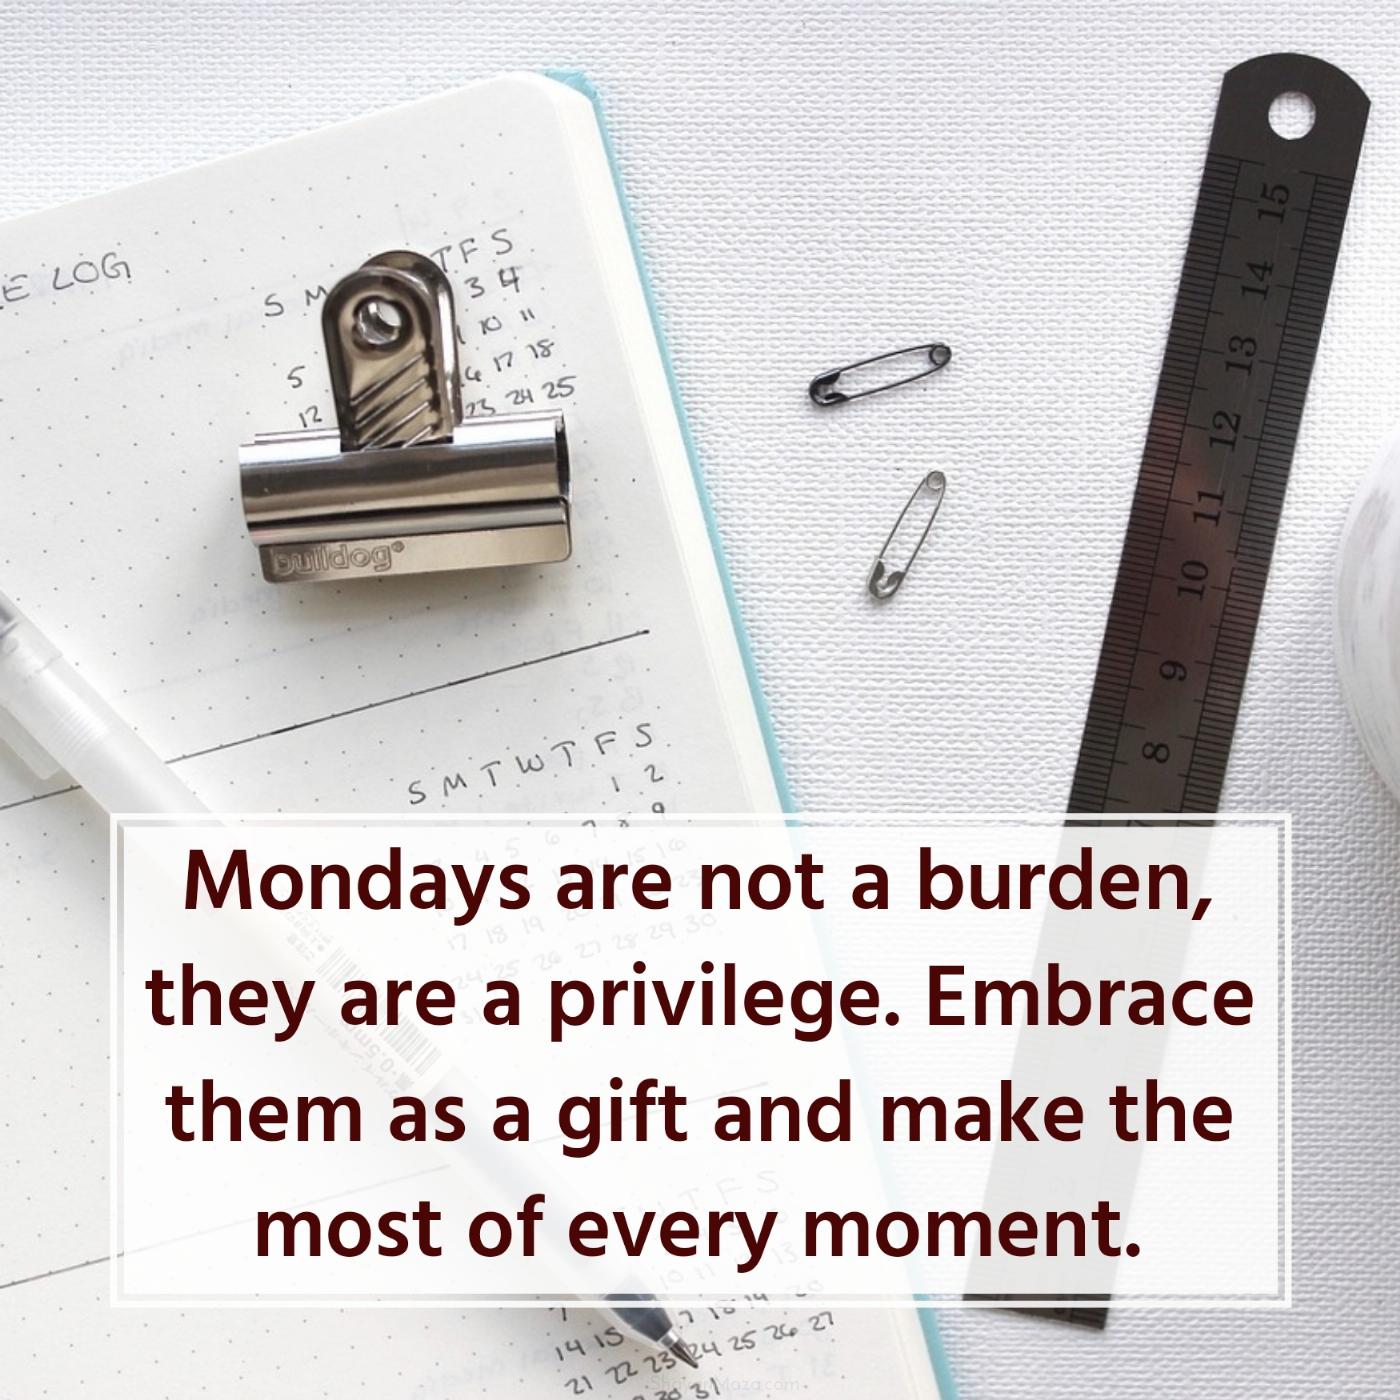 Mondays are not a burden they are a privilege